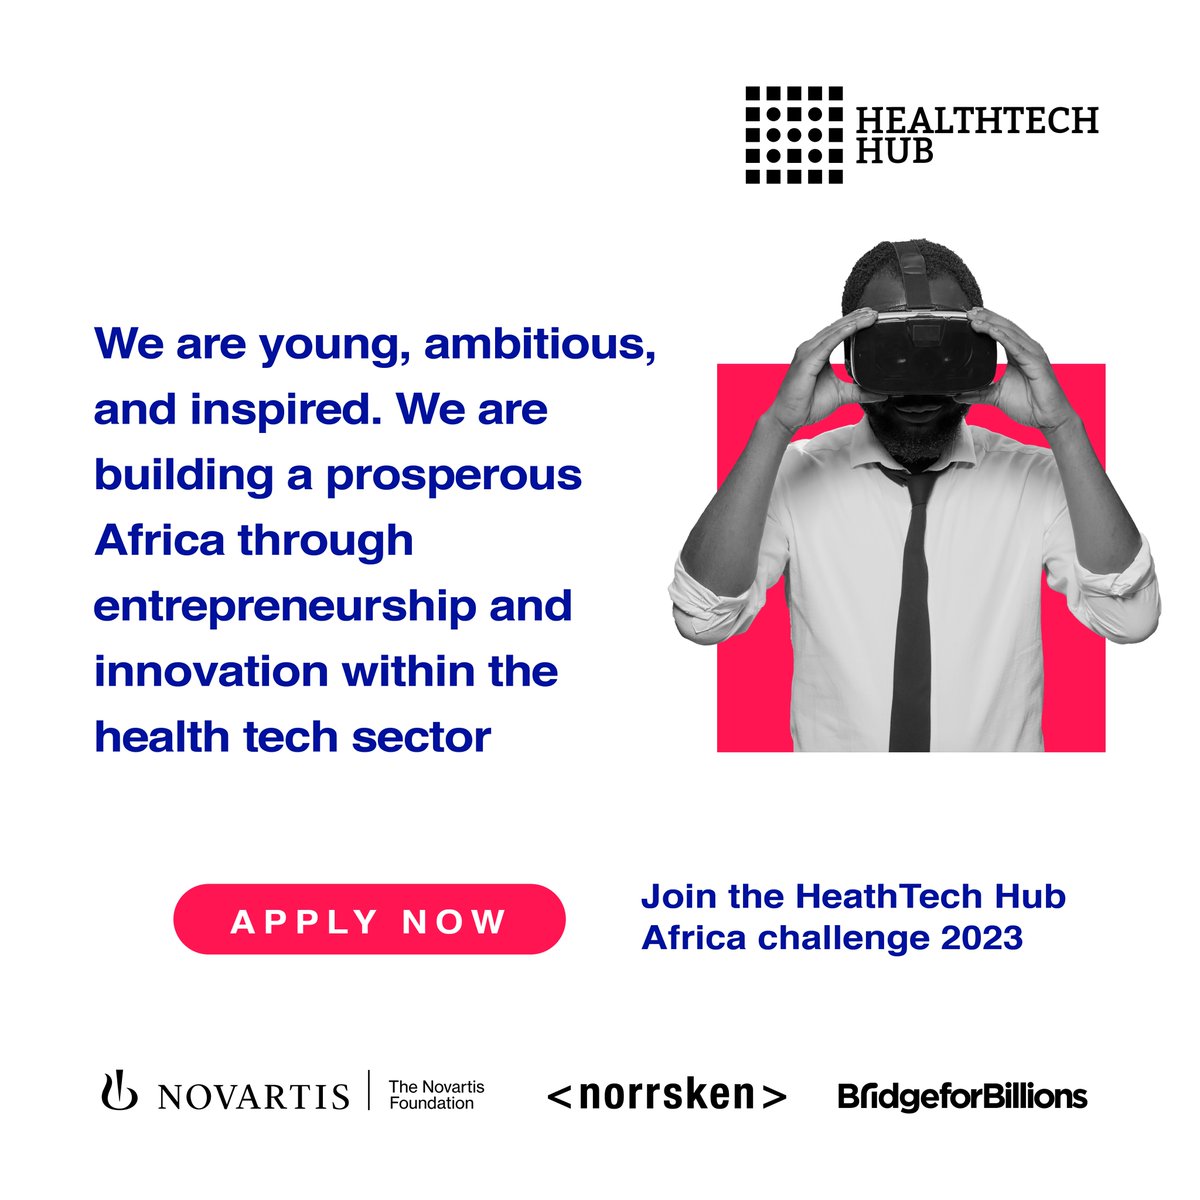 Are you a HealthTech innovator based in Africa? Apply now at thehealthtech.org/challenges-202… to be a part of the HealthTech Hub's next cohort. Applications will be open until October 30th. #innovation #startups #healthtechhub #africa #healthtechinnovation #innovationmanagement